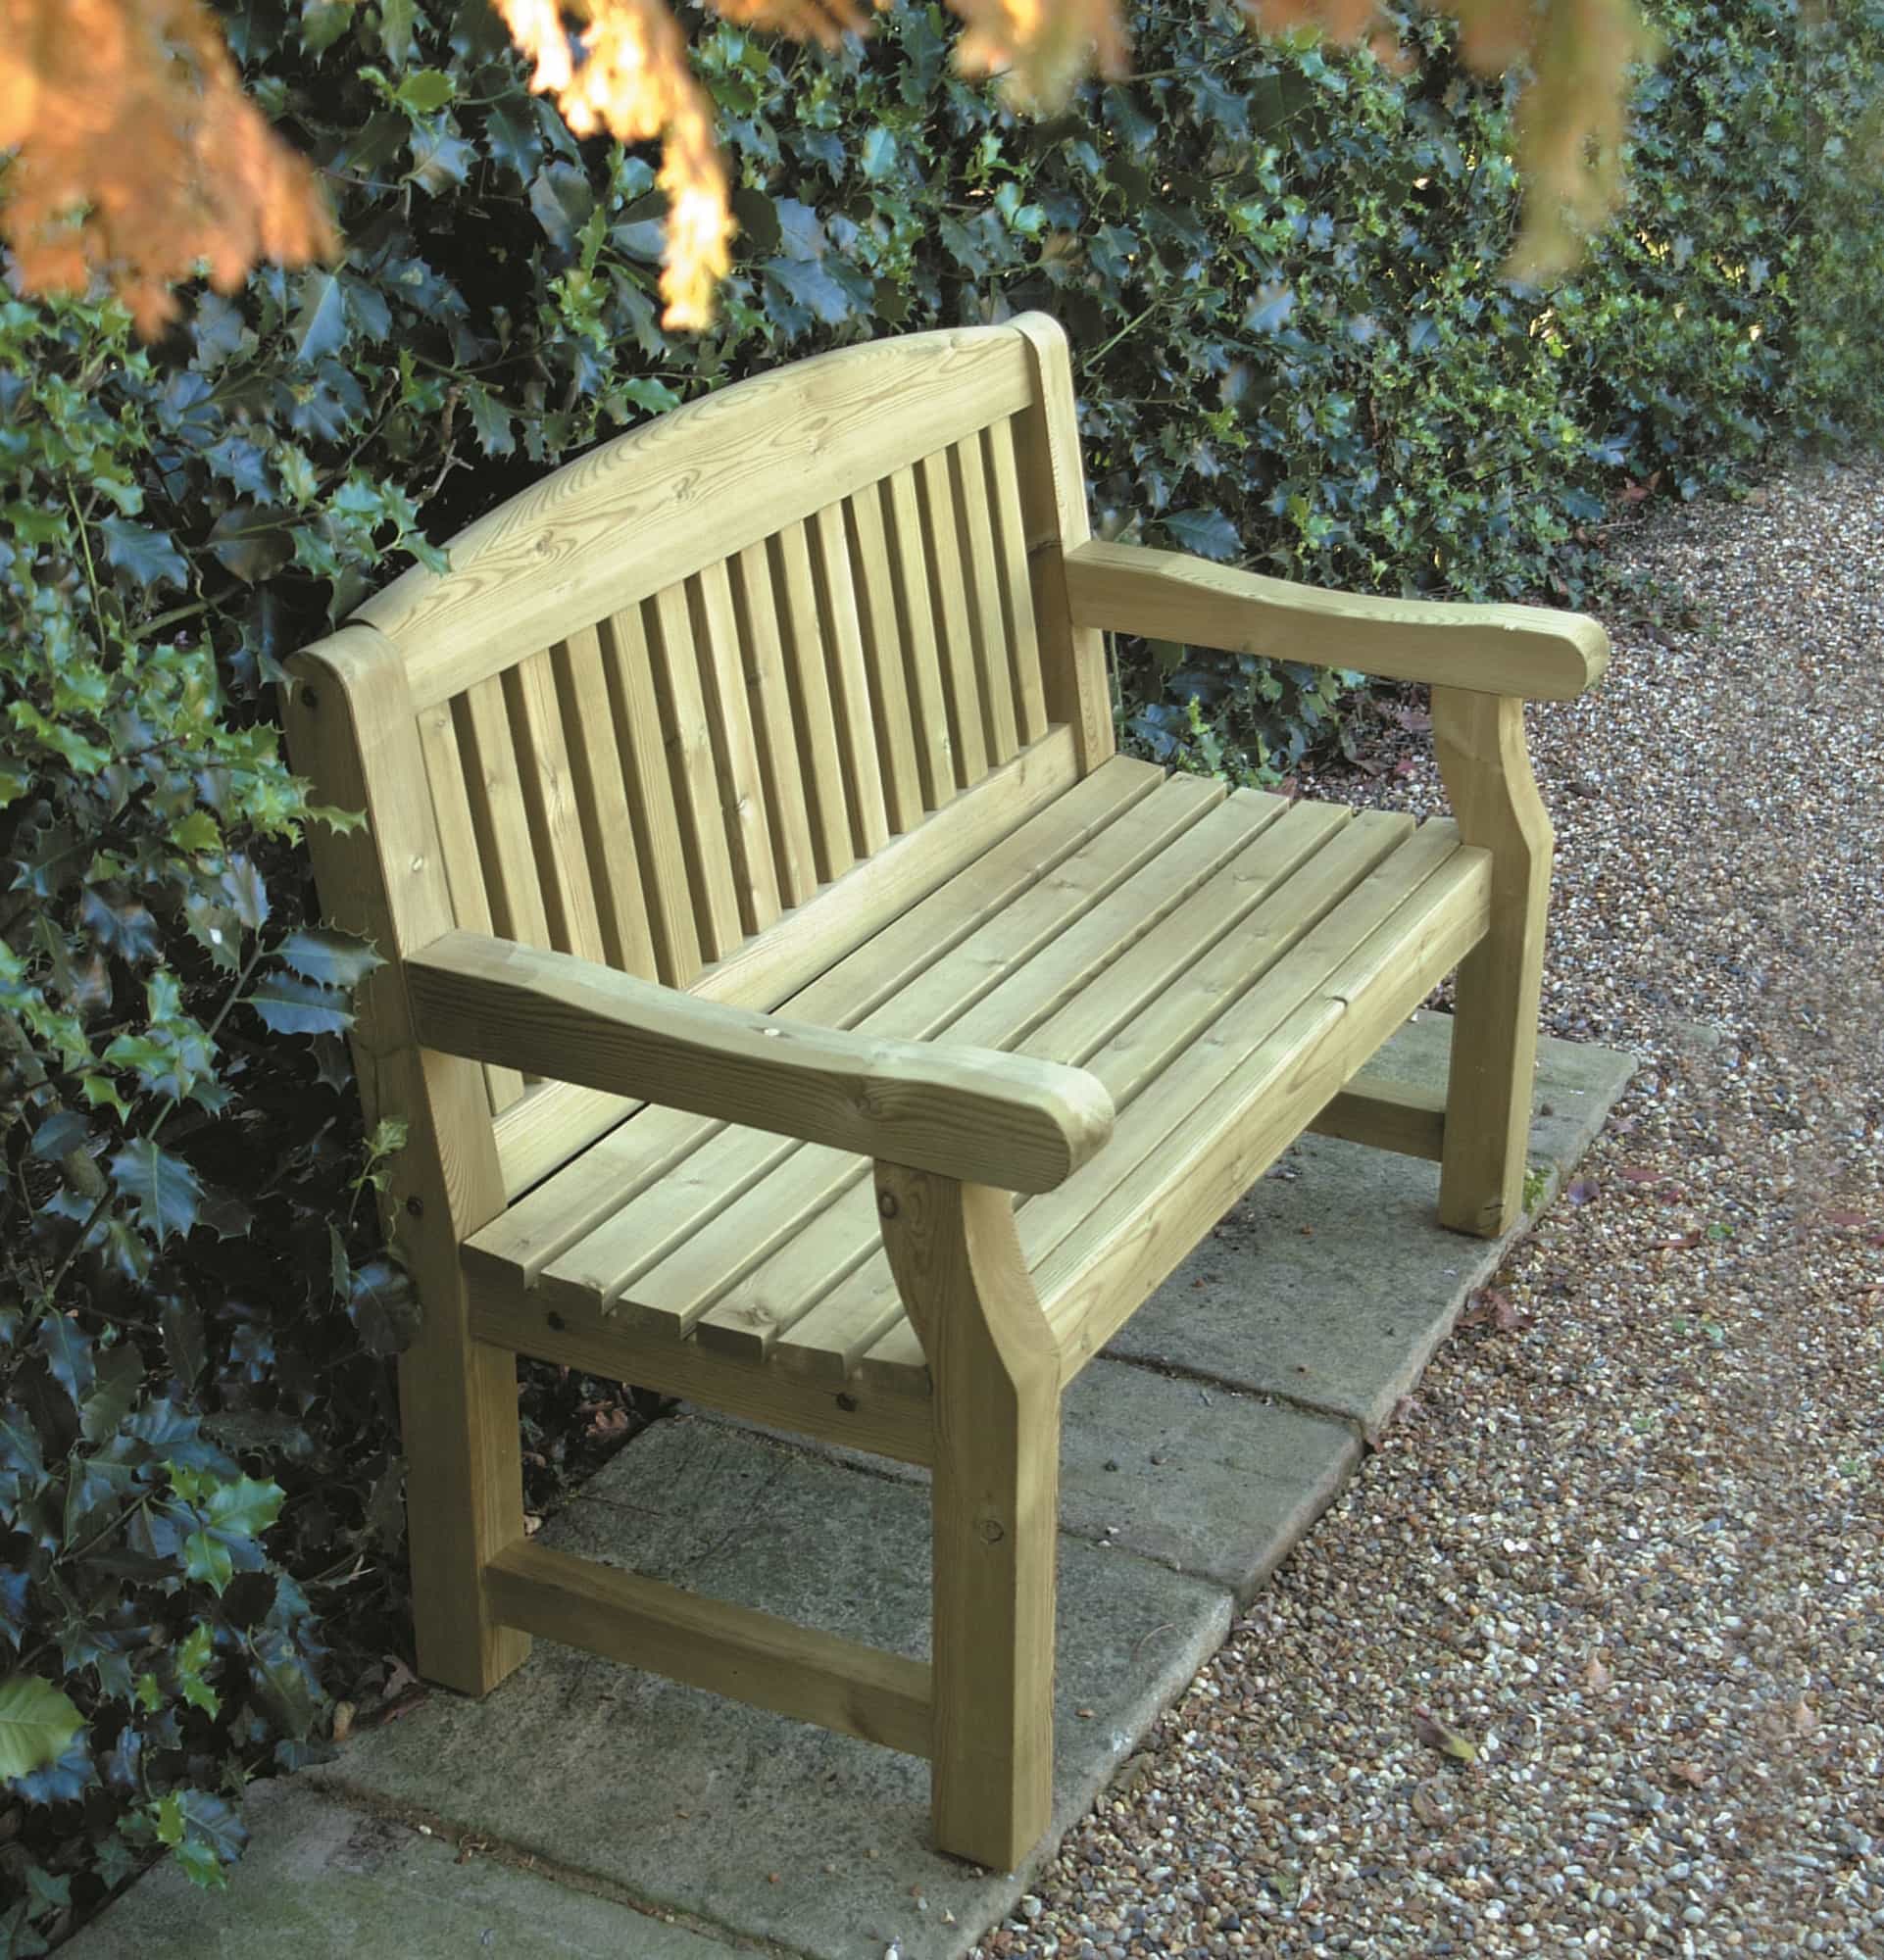 Wooden 5 Garden Bench S Duncombe Sawmill Local And Uk Delivery From